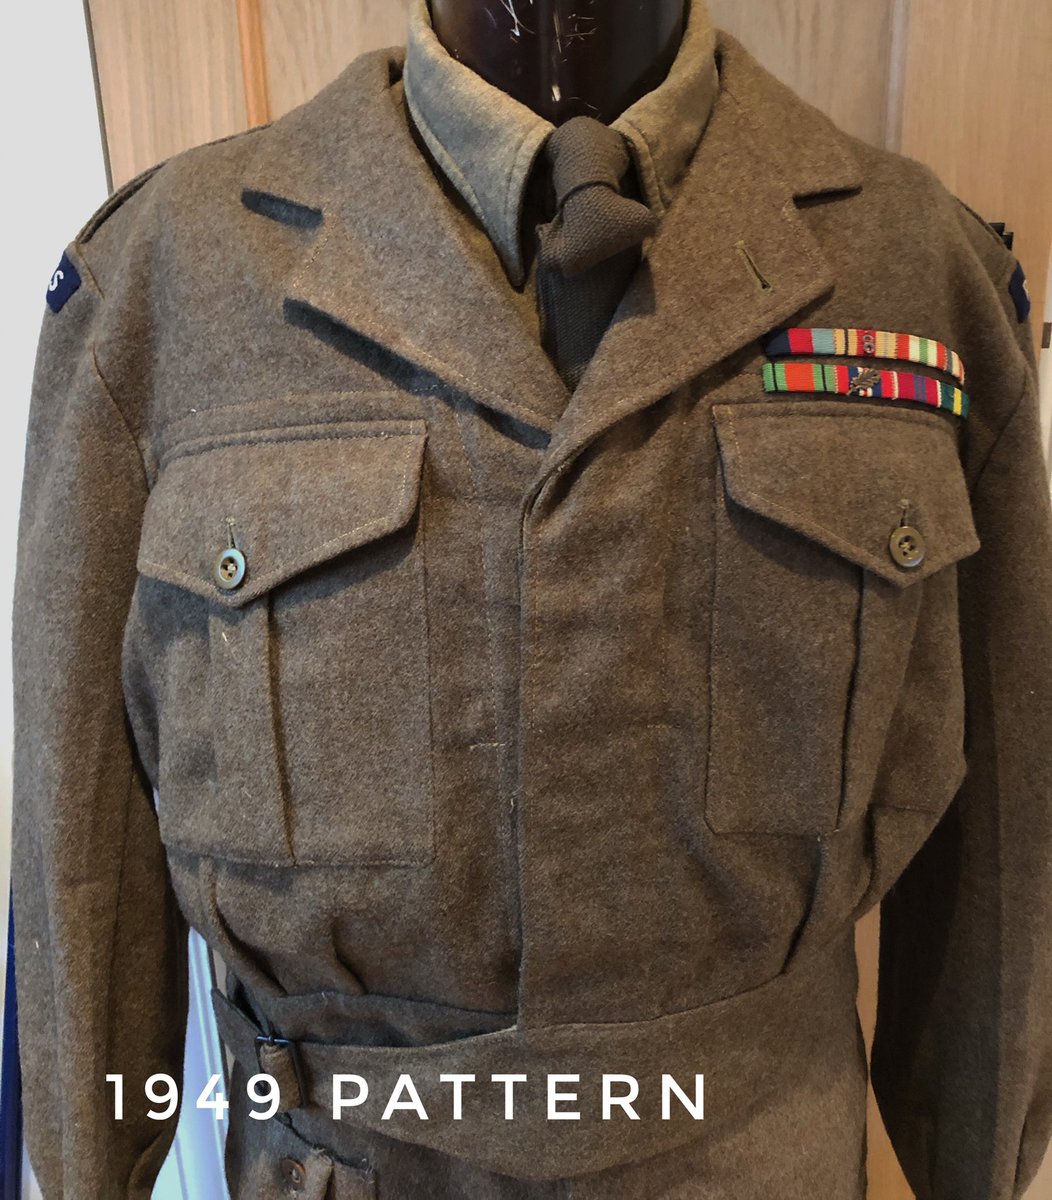 National Service - that period of compulsory military service from 1949-63 - is pretty much synonymous with 1949 Pattern Battledress. (There was no faffing about with stand and fall collars this time - there was a full-on open-neck for shirt and tie)  #BattledressThread